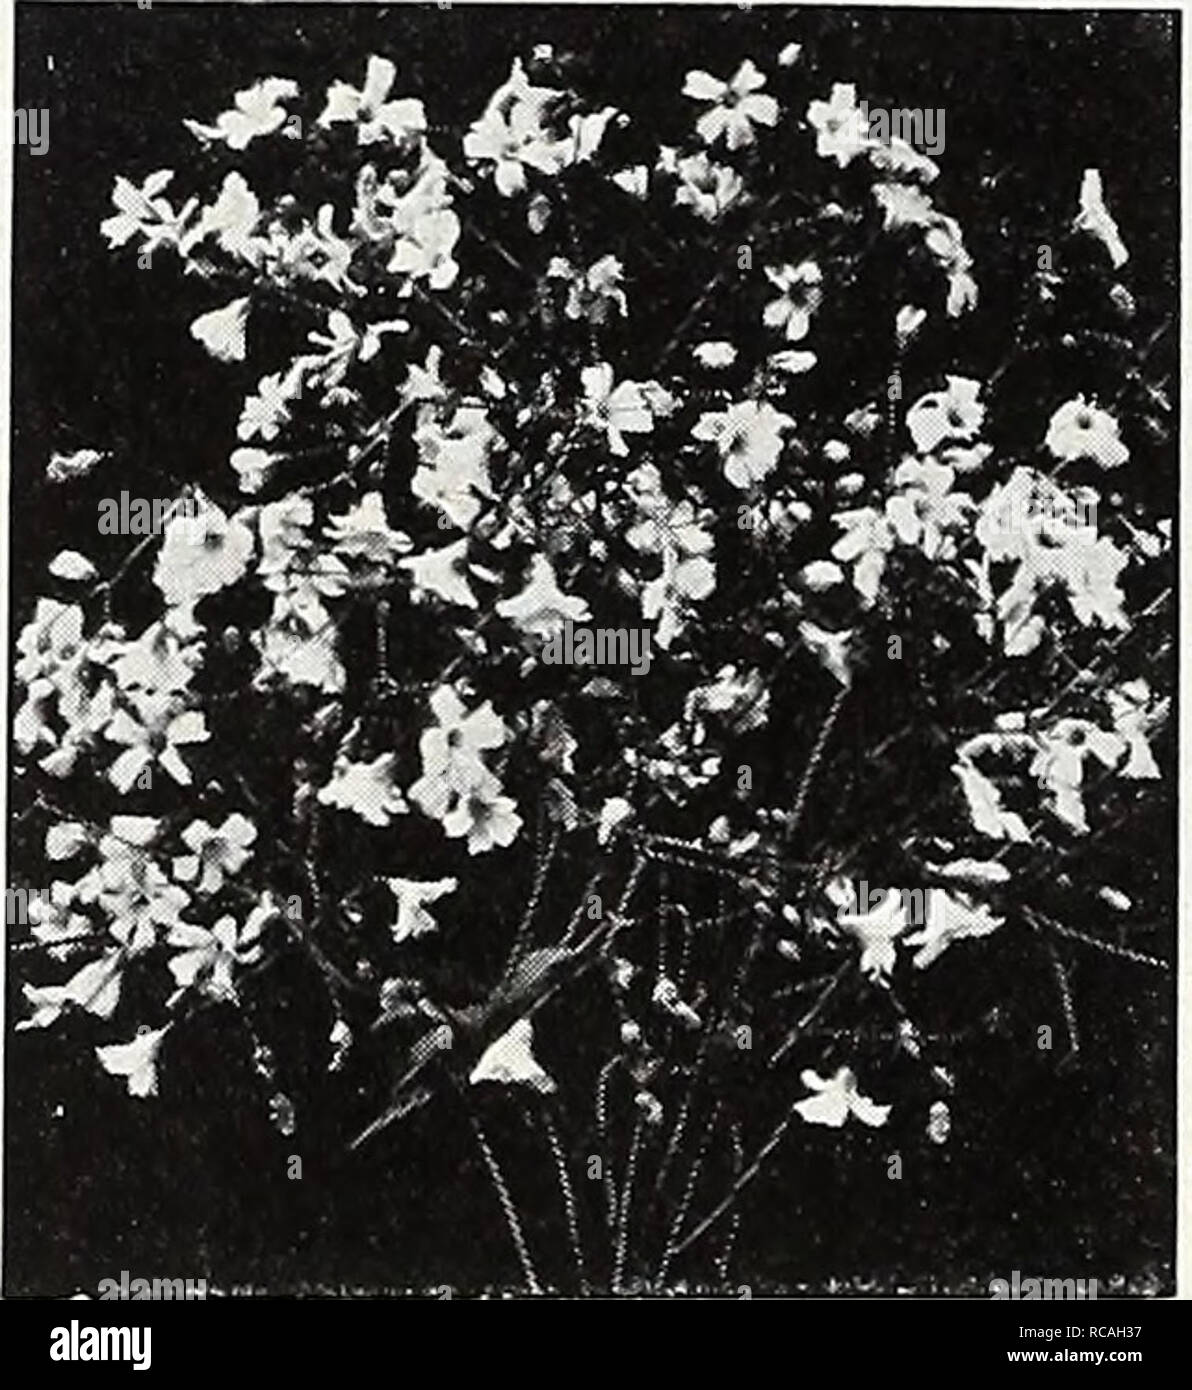 . Dreer's 1950. Seeds Catalogs; Nursery stock Catalogs; Gardening Equipment and supplies Catalogs; Flowers Seeds Catalogs; Vegetables Seeds Catalogs; Fruit Seeds Catalogs. Heuchera — Sdngumea. Gypsophila — Alba Grandiflora HELIOTROPE, Choice Mixed, 2608. (Cherry Pie.) Delightfully fragrant, large blue and white flower heads. Grow in pots, porch boxes or beds. 2 ft. Pkt. 20(;'-. HELIOPSIS, Pitcheriana, 2605. (Orange Sun- flower.) Brilliant single golden yellow flow- ers all summer. 3-4 ft. tall. Pkt. 25(f. HELENIUM, Hoopesii, 2566. Perennials 2 ft. tall witli a mass of bright orange Daisy-like  Stock Photo